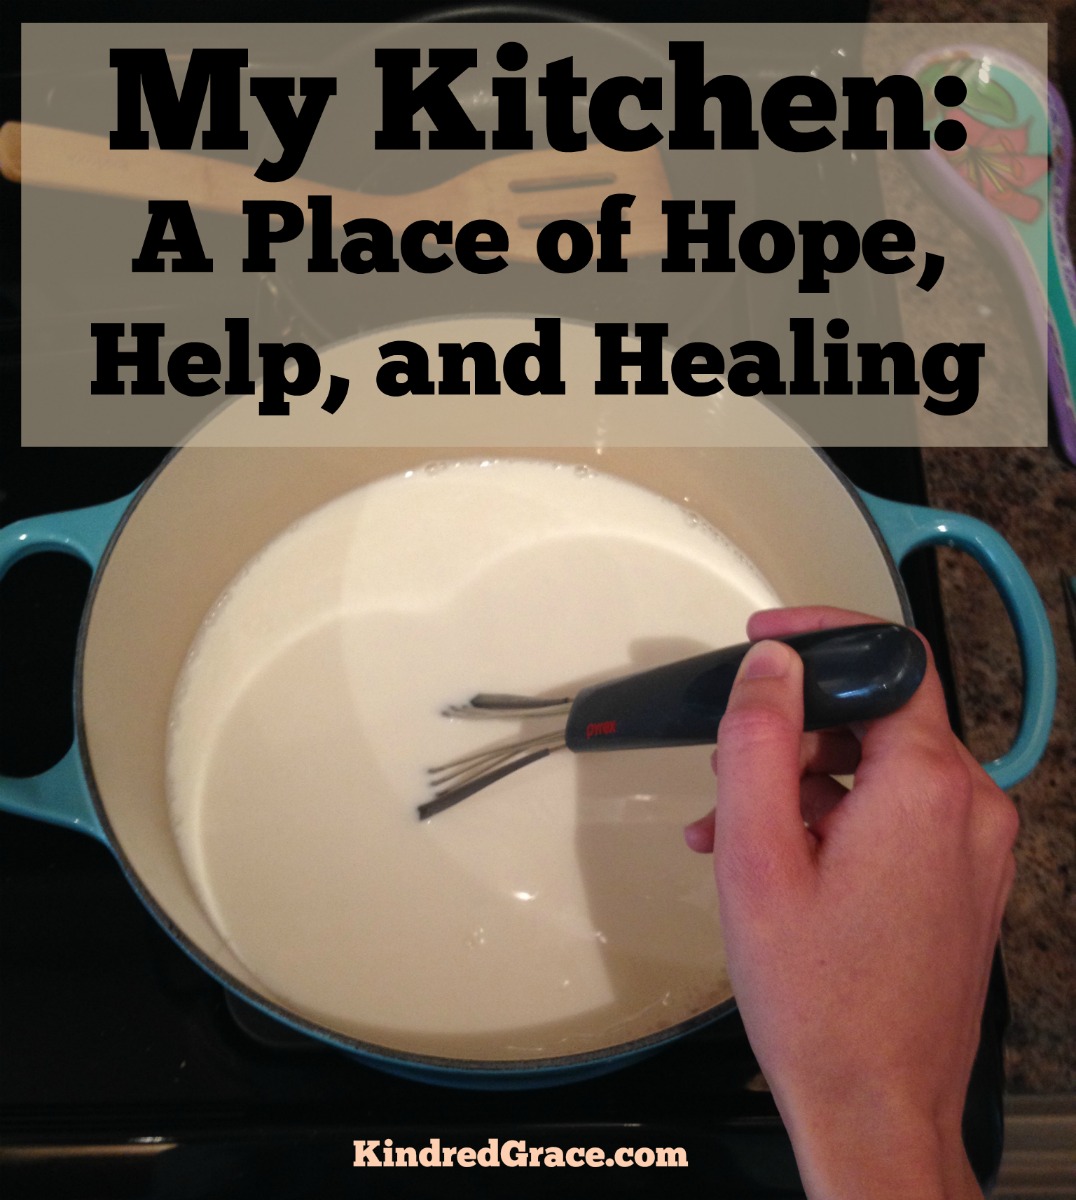 My Kitchen: A Place of Hope, Help, and Healing